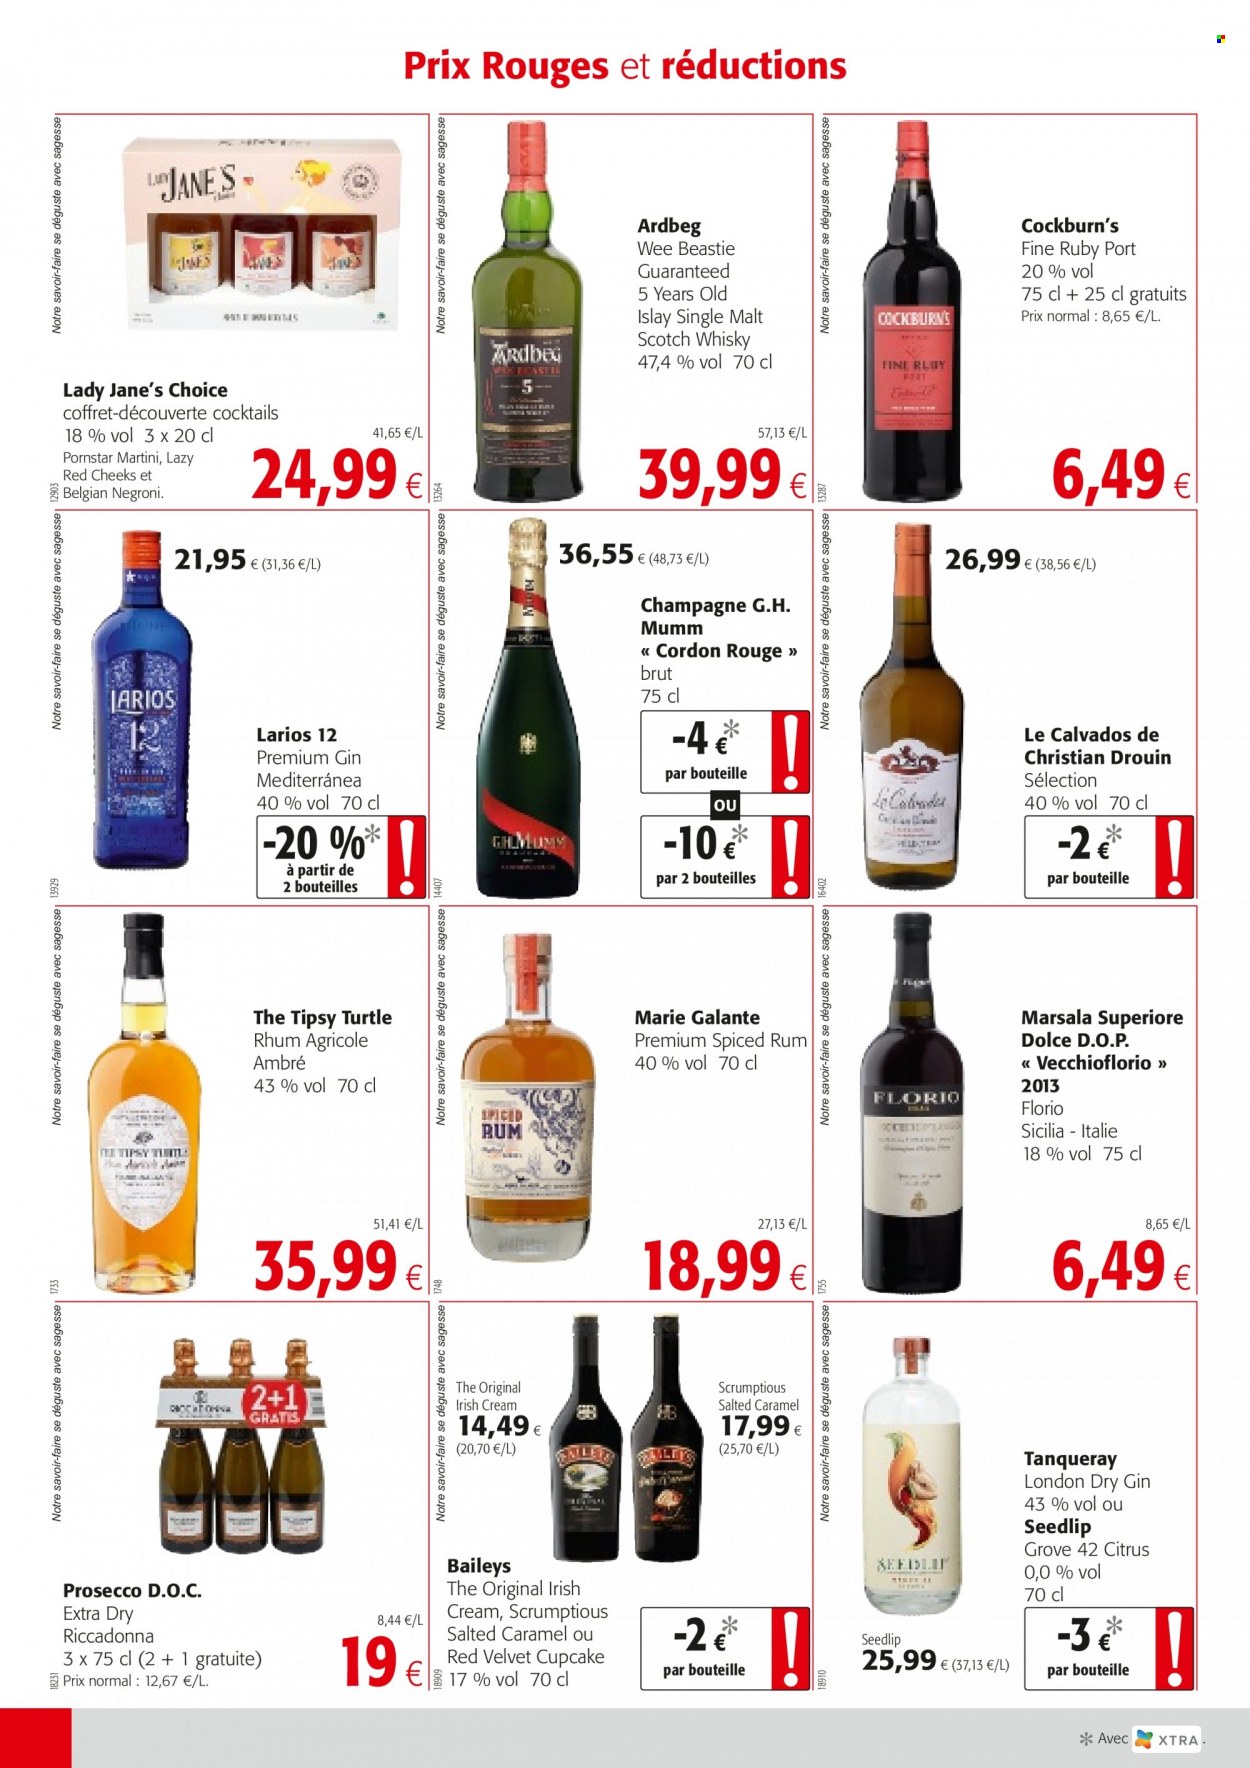 thumbnail - Colruyt-aanbieding - 01/12/2021 - 14/12/2021 -  producten in de aanbieding - cupcakes, champagne, Marsala, prosecco, rum, London Dry Gin, scotch whisky, Single Malt, Spiced rum, Calvados, Martini, whisky, gin. Pagina 2.